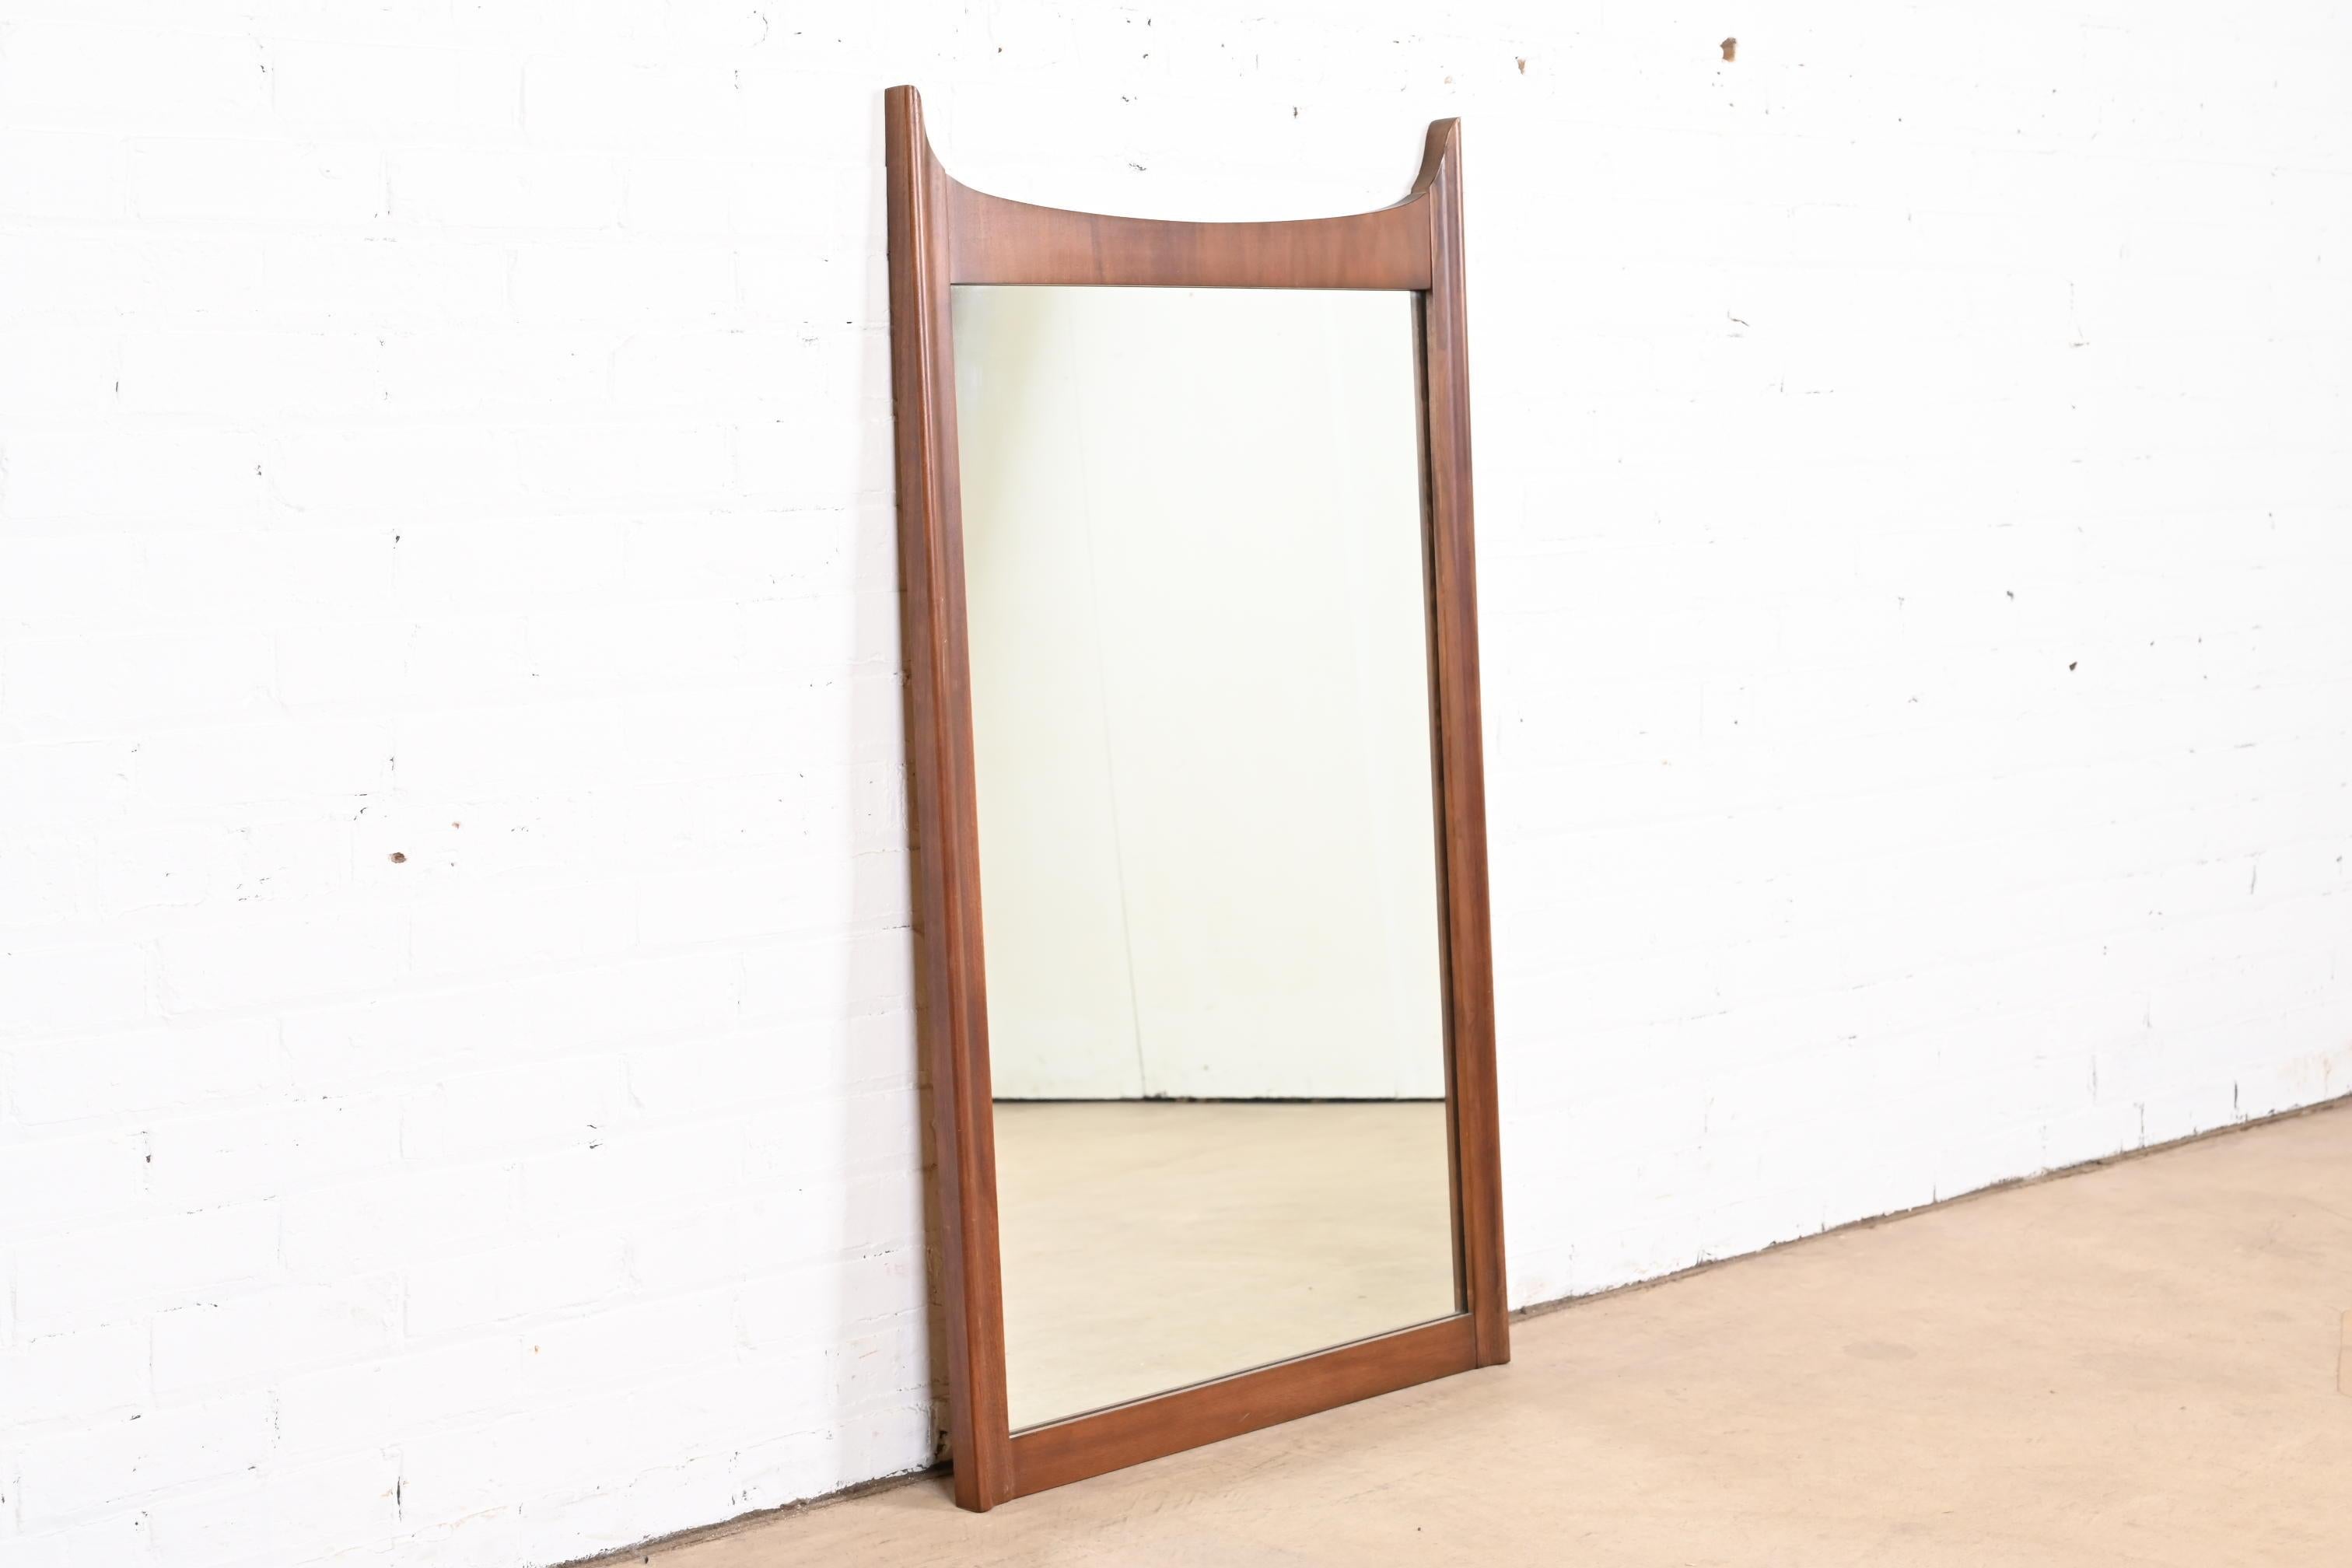 A stylish Mid-Century Modern sculpted walnut framed wall mirror

In the manner of Broyhill Brasilia

USA, 1960s

Measures: 27